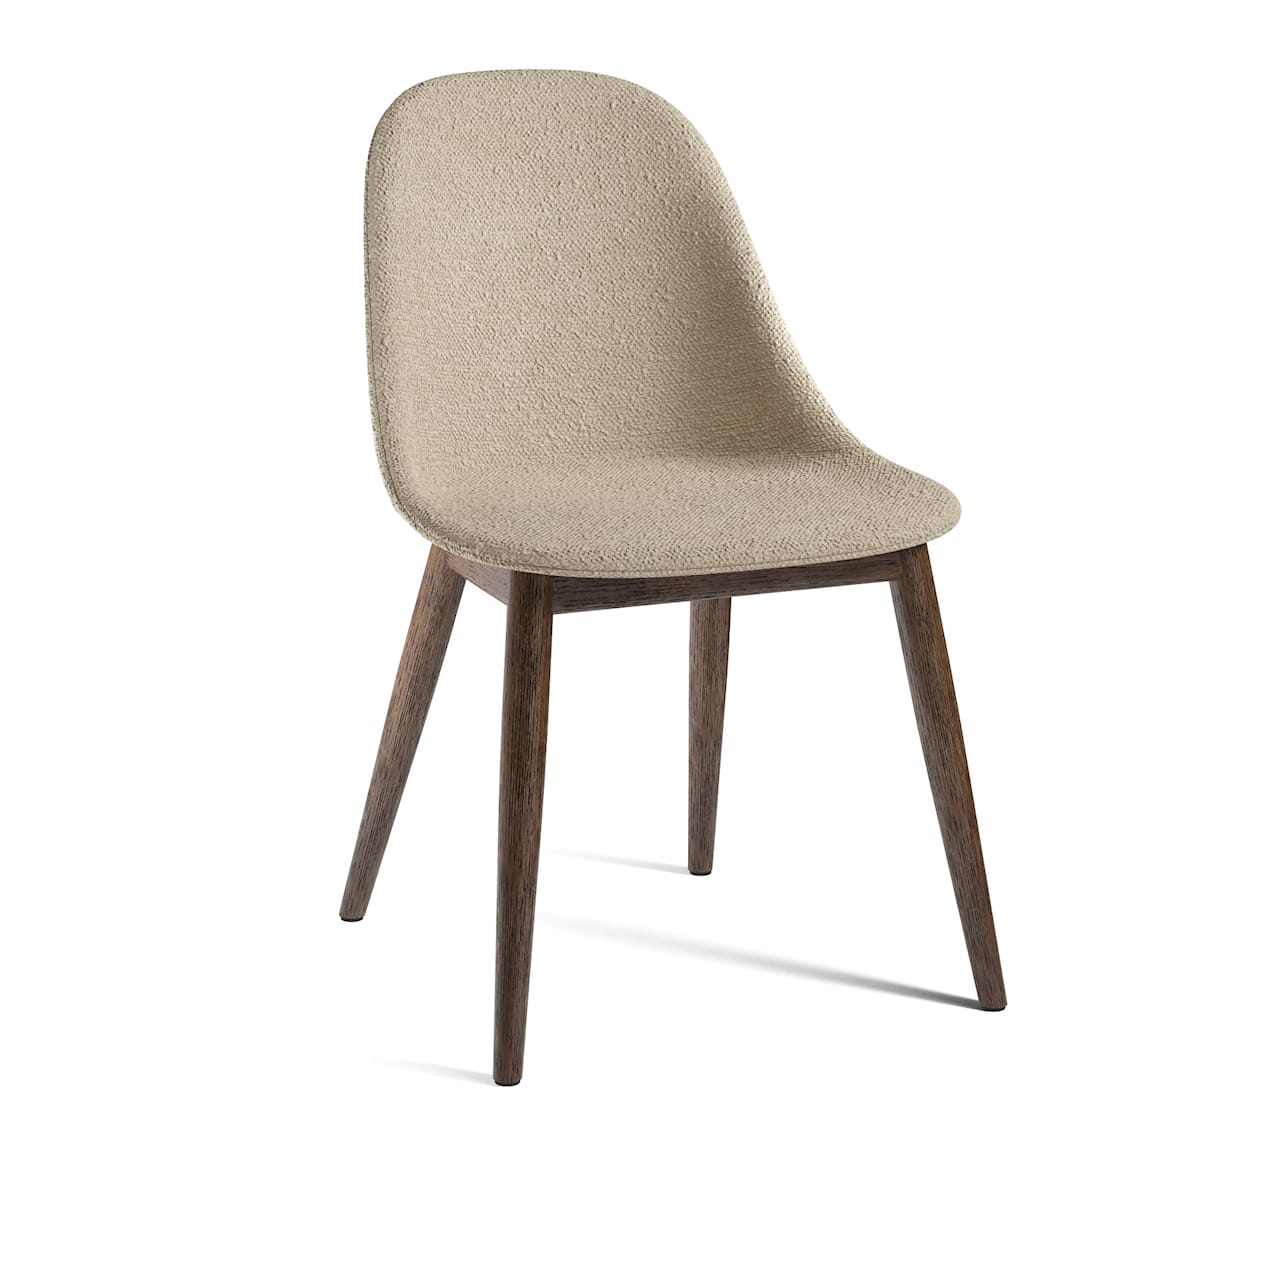 Harbour Dining Side Chair Upholstered - Dark Stained Oak